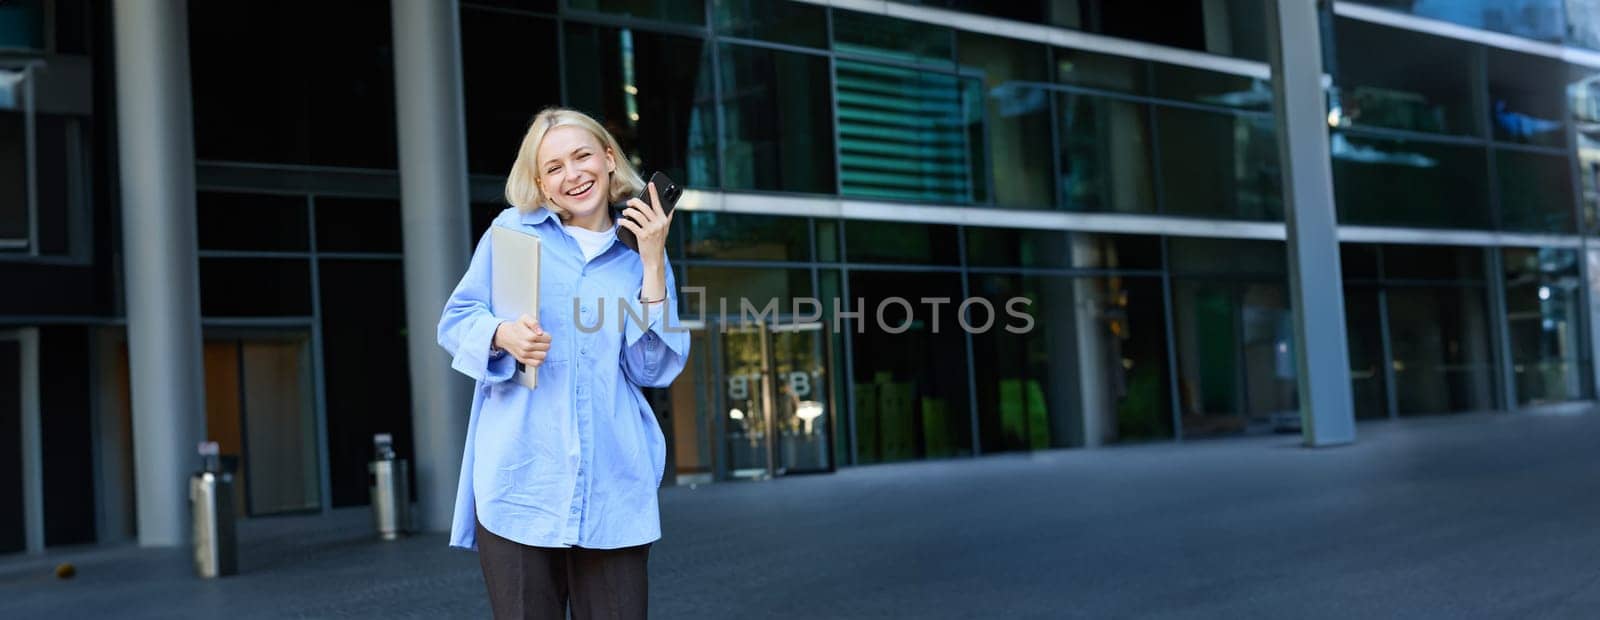 Vertical shot of modern, stylish young blond woman smiling, posing in trousers and blue collar shirt, holding smartphone and laughing, posing near campus building, has laptop in hand.